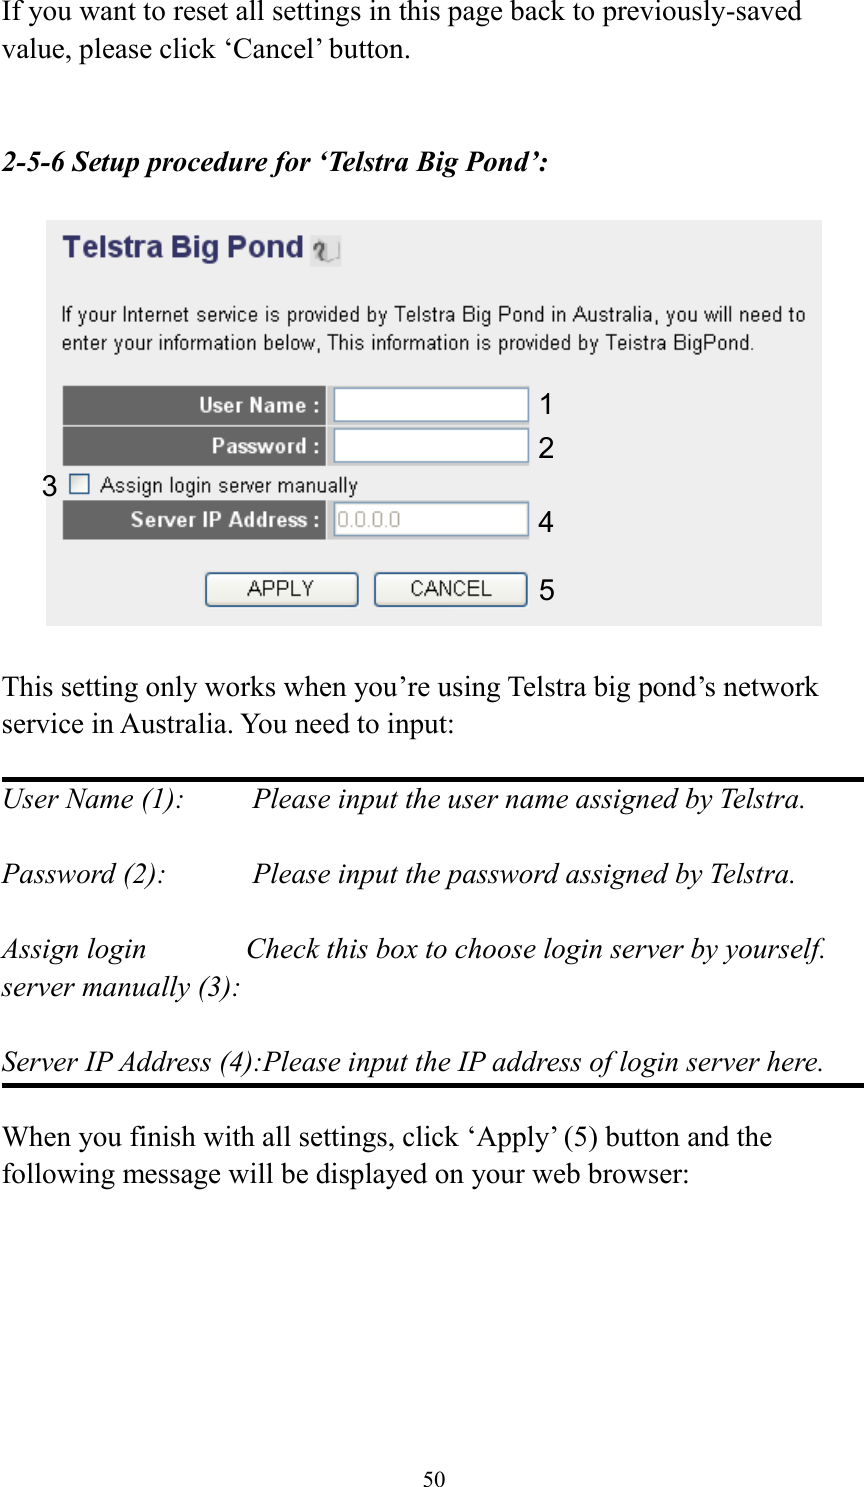 50 If you want to reset all settings in this page back to previously-saved value, please click ‘Cancel’ button.   2-5-6 Setup procedure for ‘Telstra Big Pond’:    This setting only works when you’re using Telstra big pond’s network service in Australia. You need to input:  User Name (1):     Please input the user name assigned by Telstra.  Password (2):      Please input the password assigned by Telstra.  Assign login       Check this box to choose login server by yourself. server manually (3):    Server IP Address (4):Please input the IP address of login server here.  When you finish with all settings, click ‘Apply’ (5) button and the following message will be displayed on your web browser:  1 2 3 4 5 